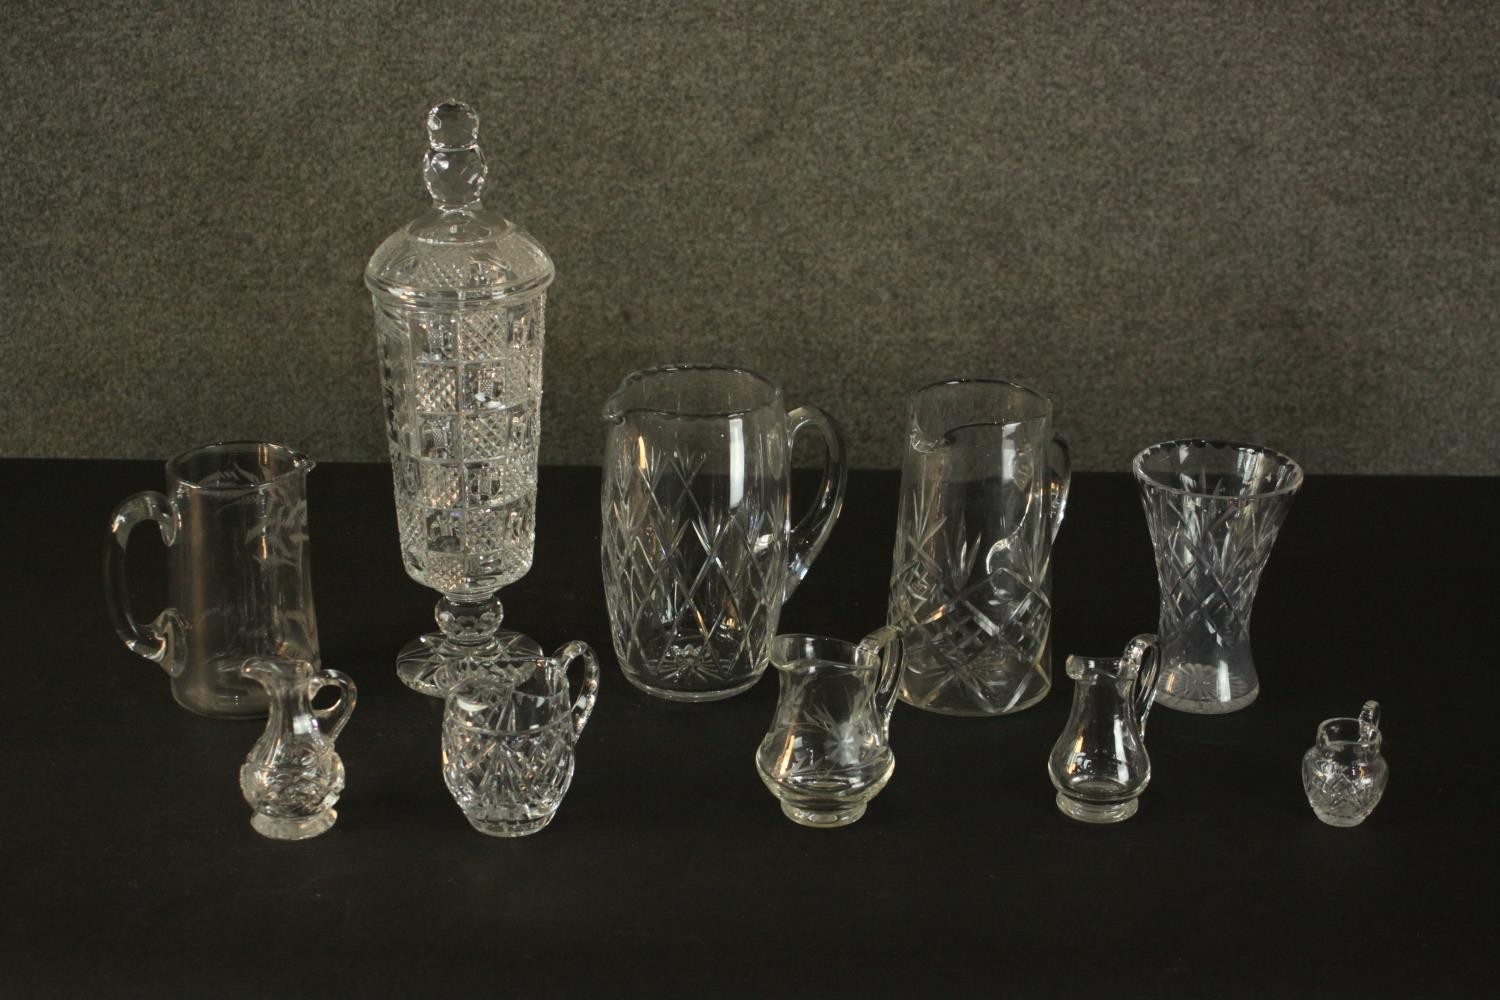 A collection of cut crystal and glass, including a large cut crystal lidded jar, various size jugs